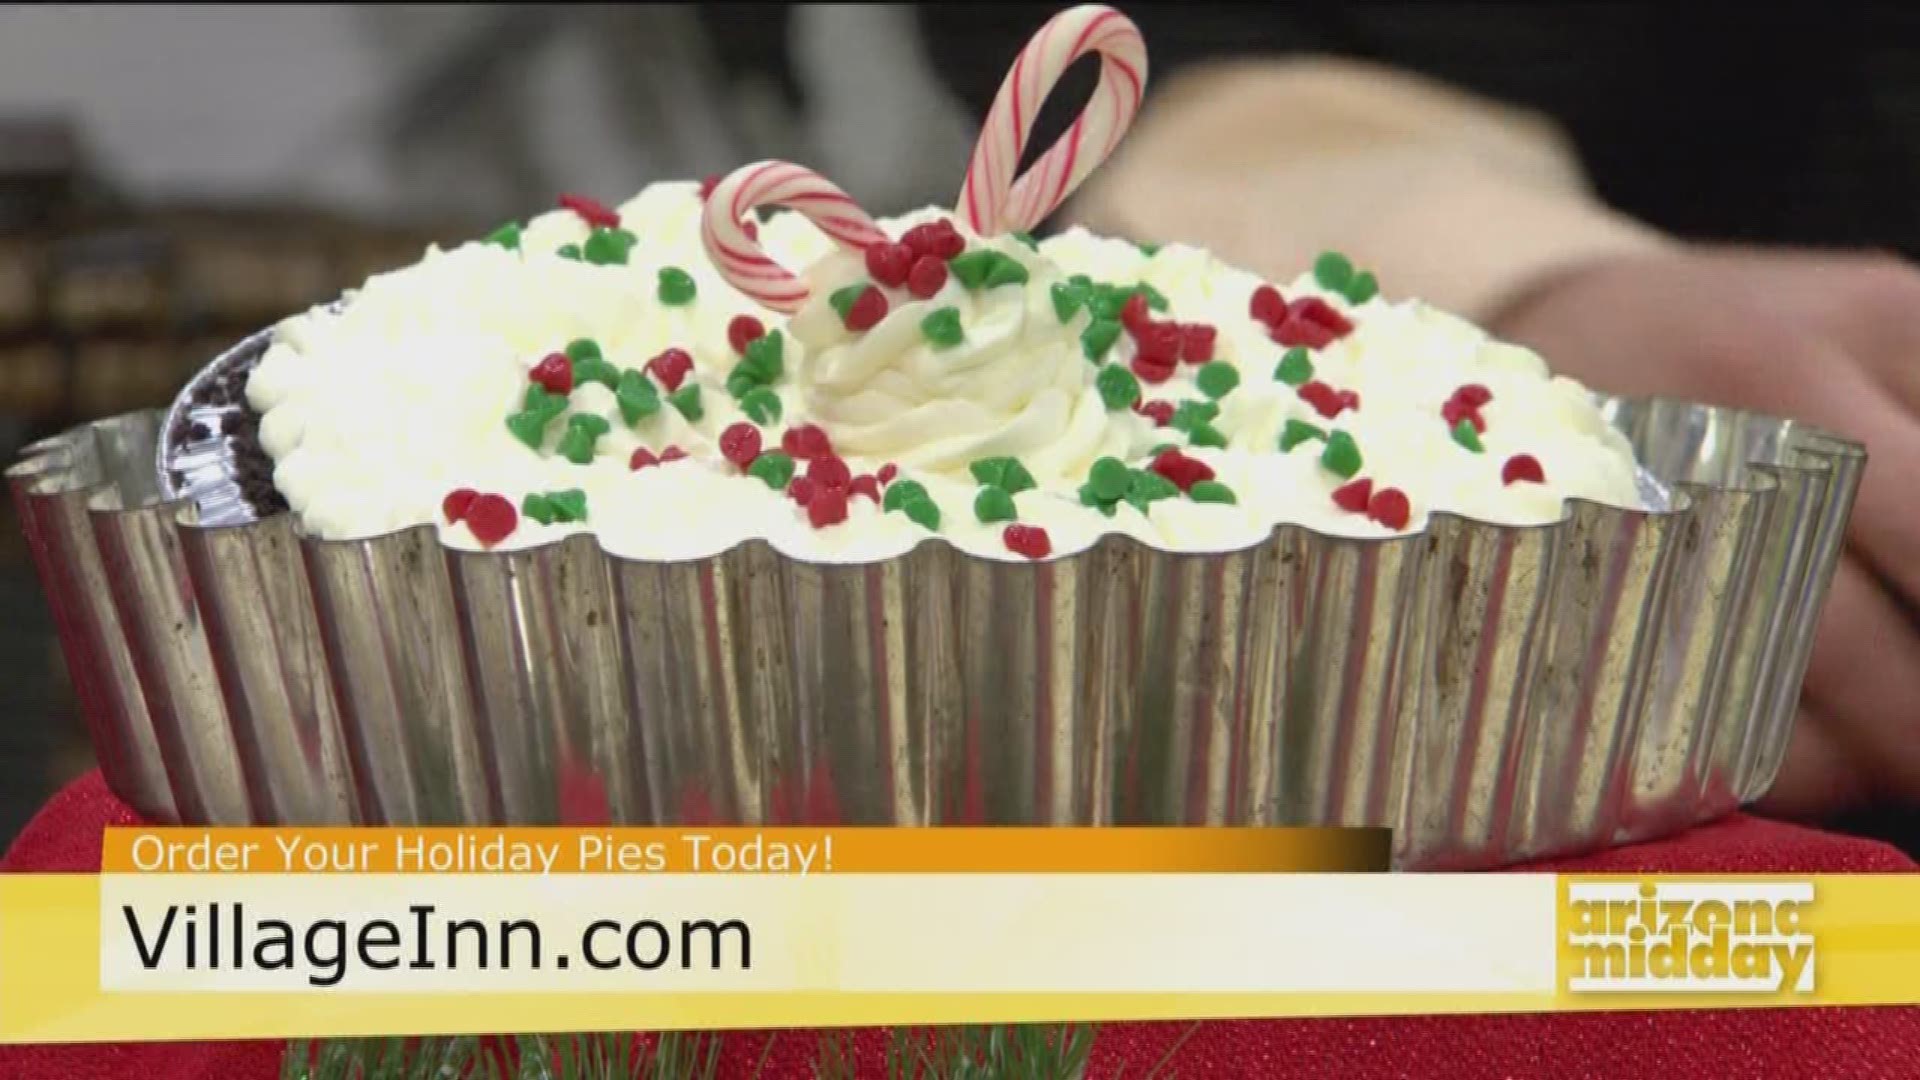 Jay Dickerson from Village Inn shows us the holiday pies from Candy Cane to Pumpkin you can order now.